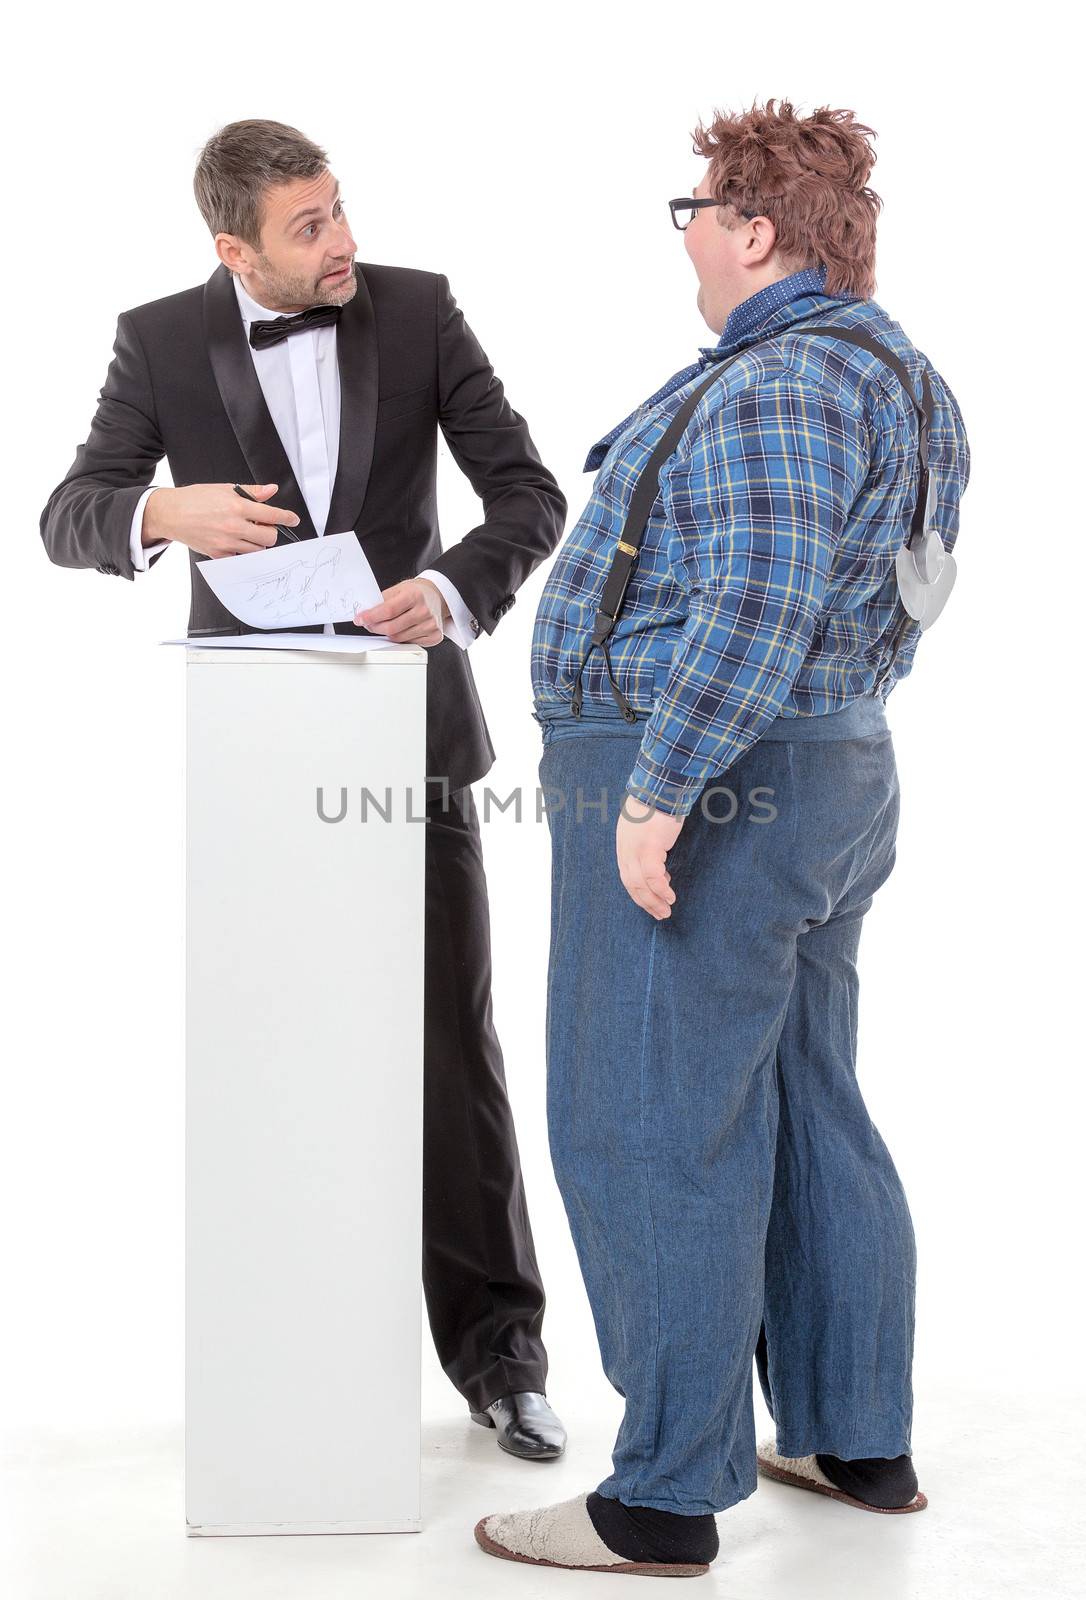 Elegant man in a tuxedo and bow tie standing arguing with an overweight country yokel